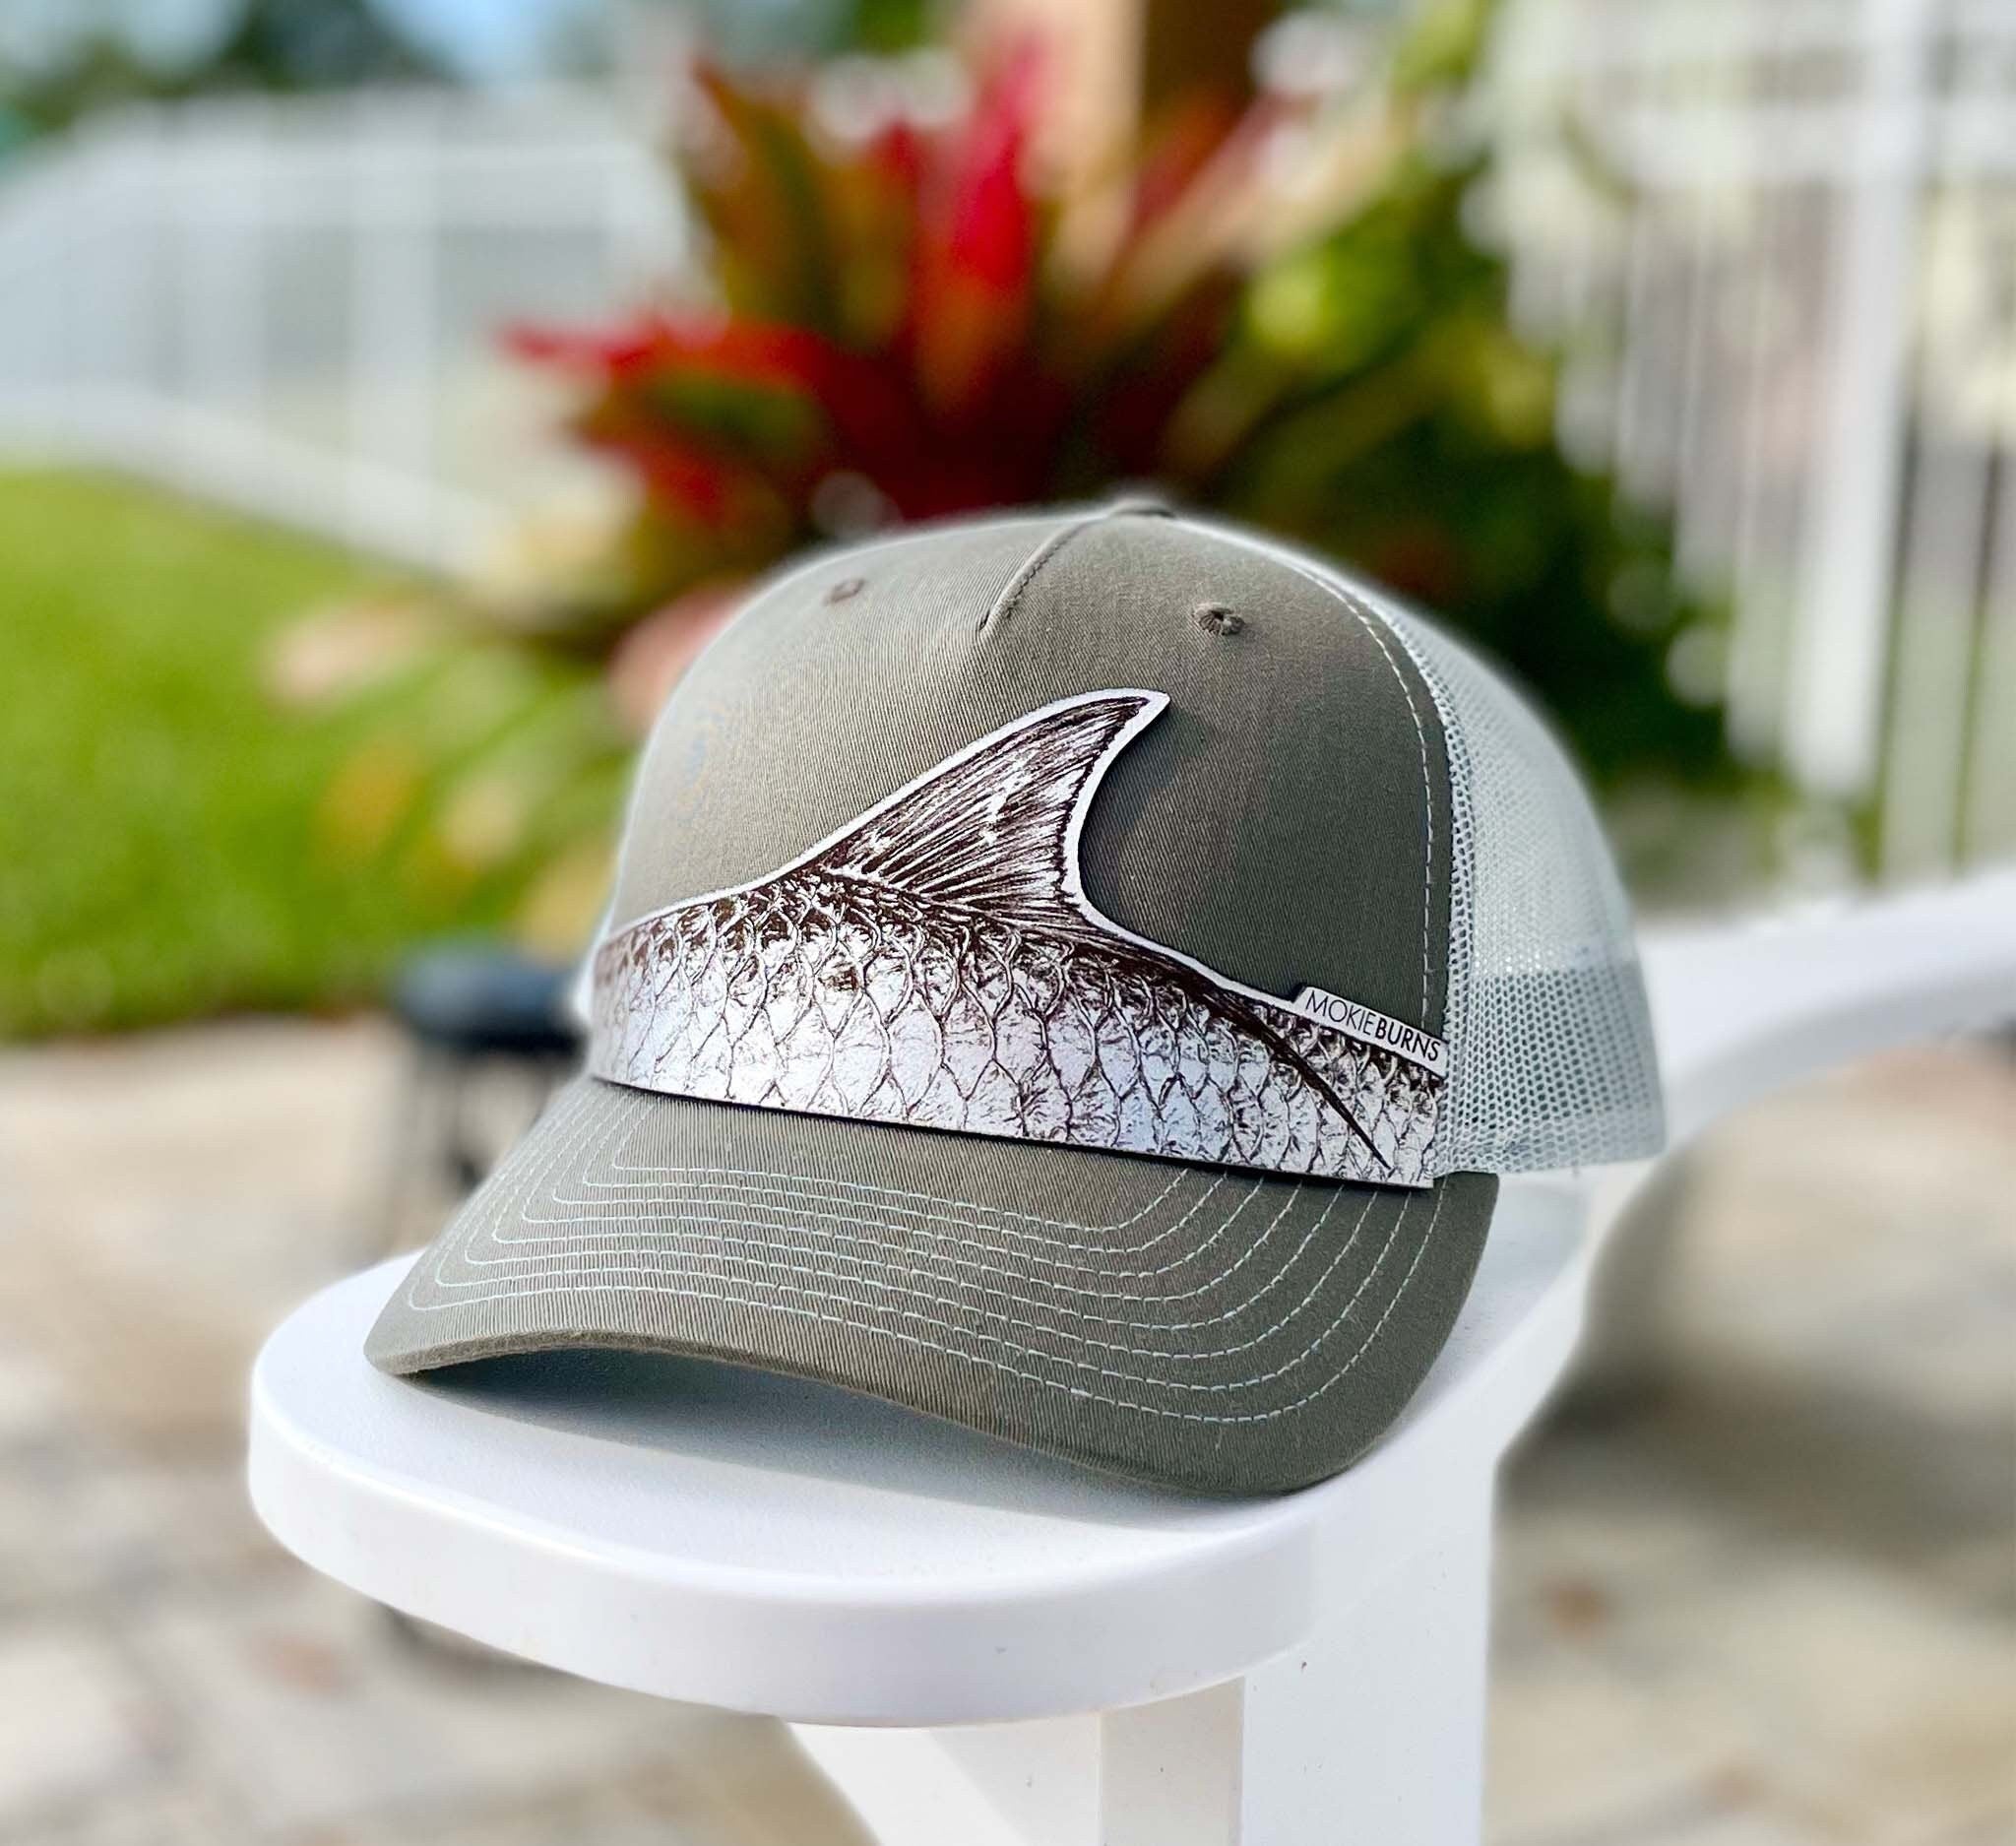 Tarpon Roll Fishing Trucker Hat- Silver Genuine Leather Patch, Fishing Husband Fathers Day Gift for Men, Mokie Richardson 112 Snap Back Hat